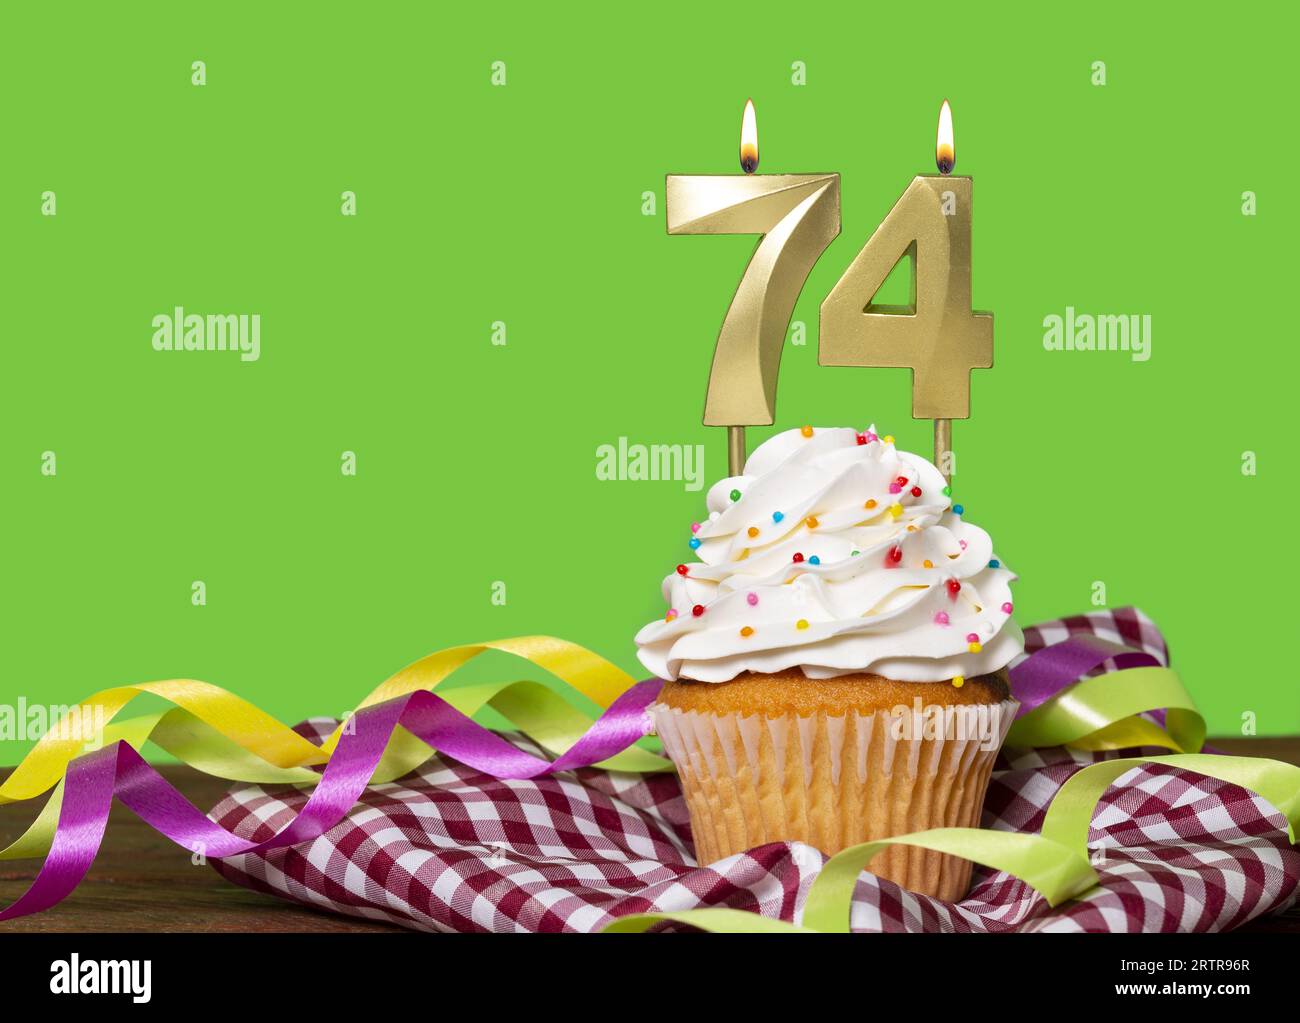 Birthday Cake With Candle Number 74 On Green Background Stock Photo